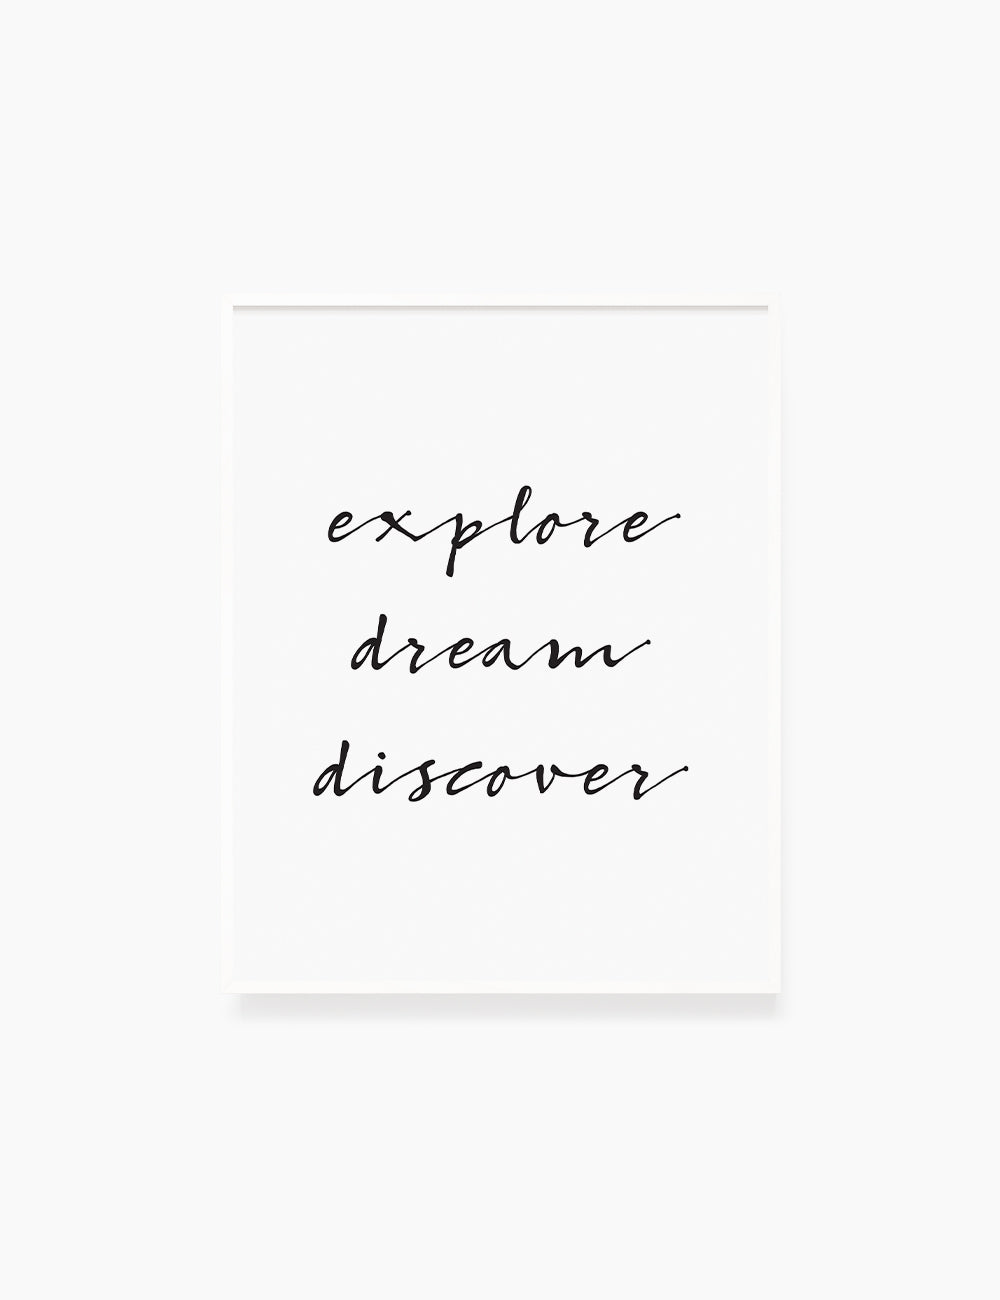 Printable Wall Art Quote: EXPLORE. DREAM. DISCOVER. Printable Poster. Inspirational Quote. Motivational Quote. WA023 - Paper Moon Art & Design